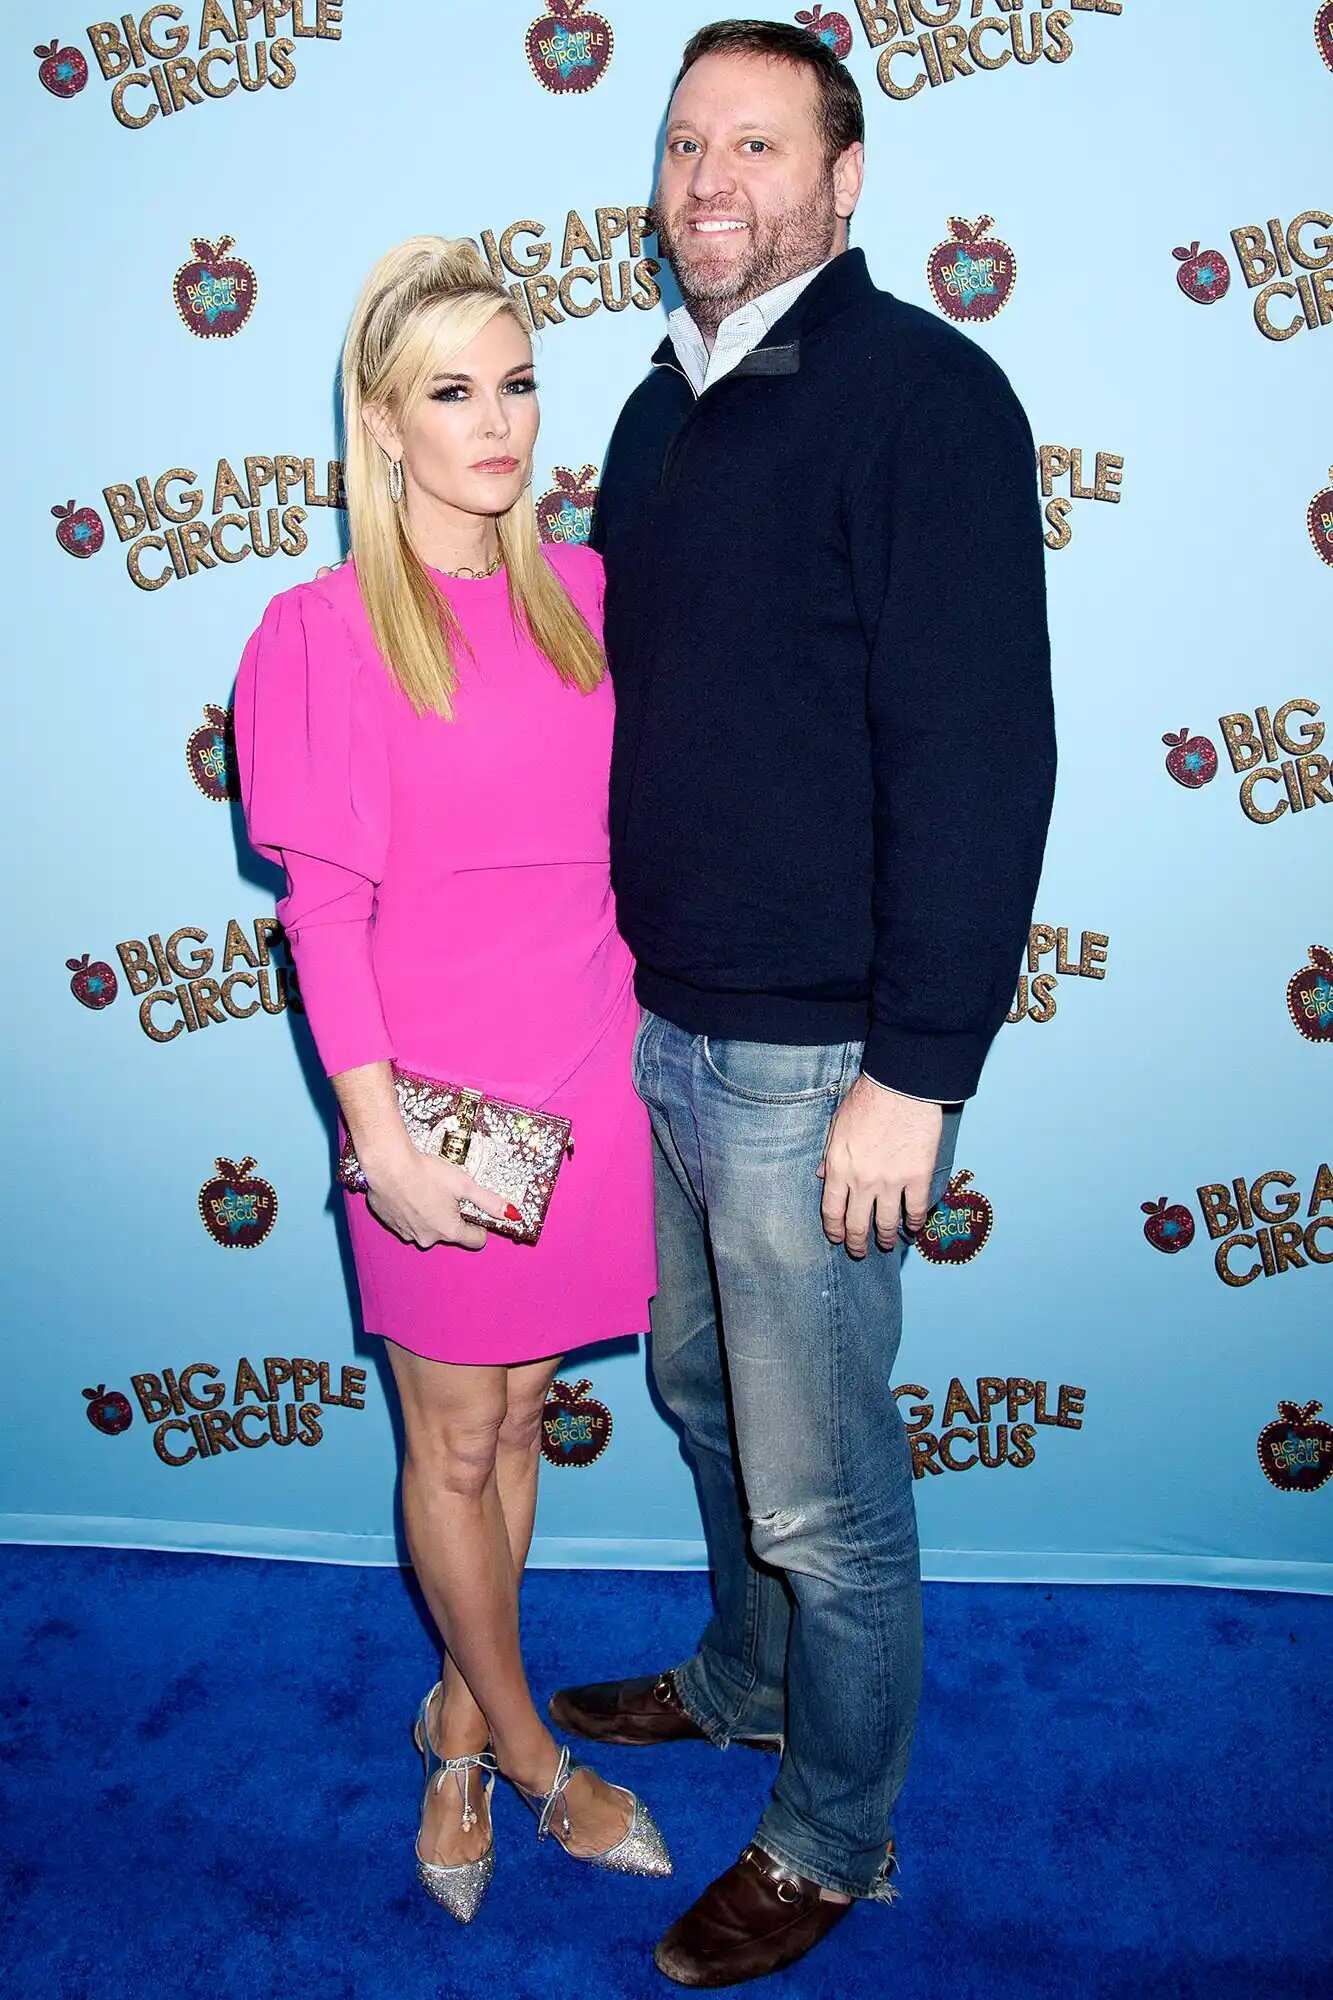 Tinsley Mortimer and Scott Kluth (Source: Us Weekly)